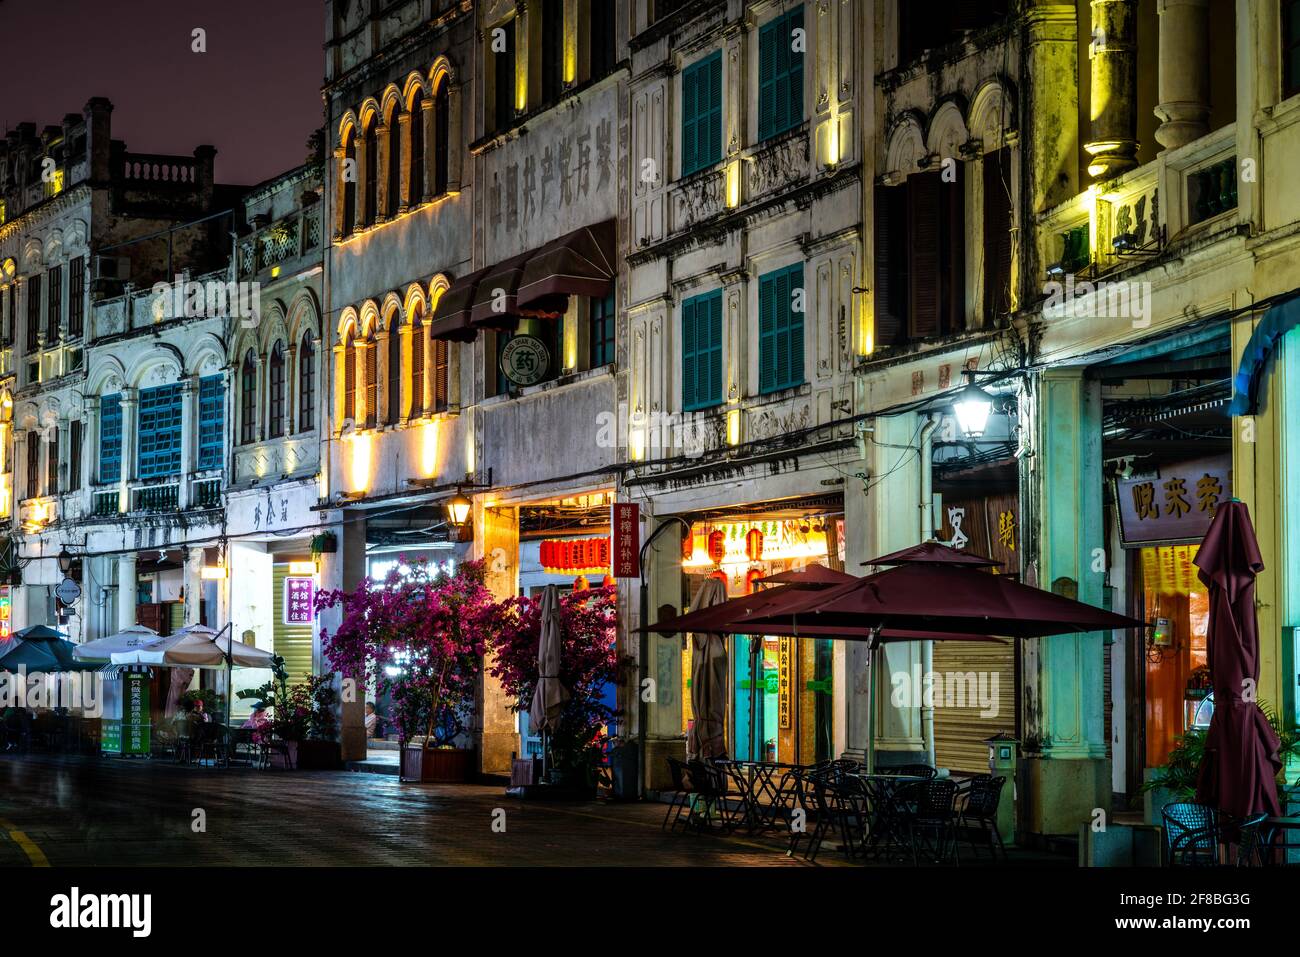 Haikou China , 23 March 2021 : Qilou or Zhongshan old street streetscape illuminated at night with colonial buildings in Haikou old town Hainan China Stock Photo